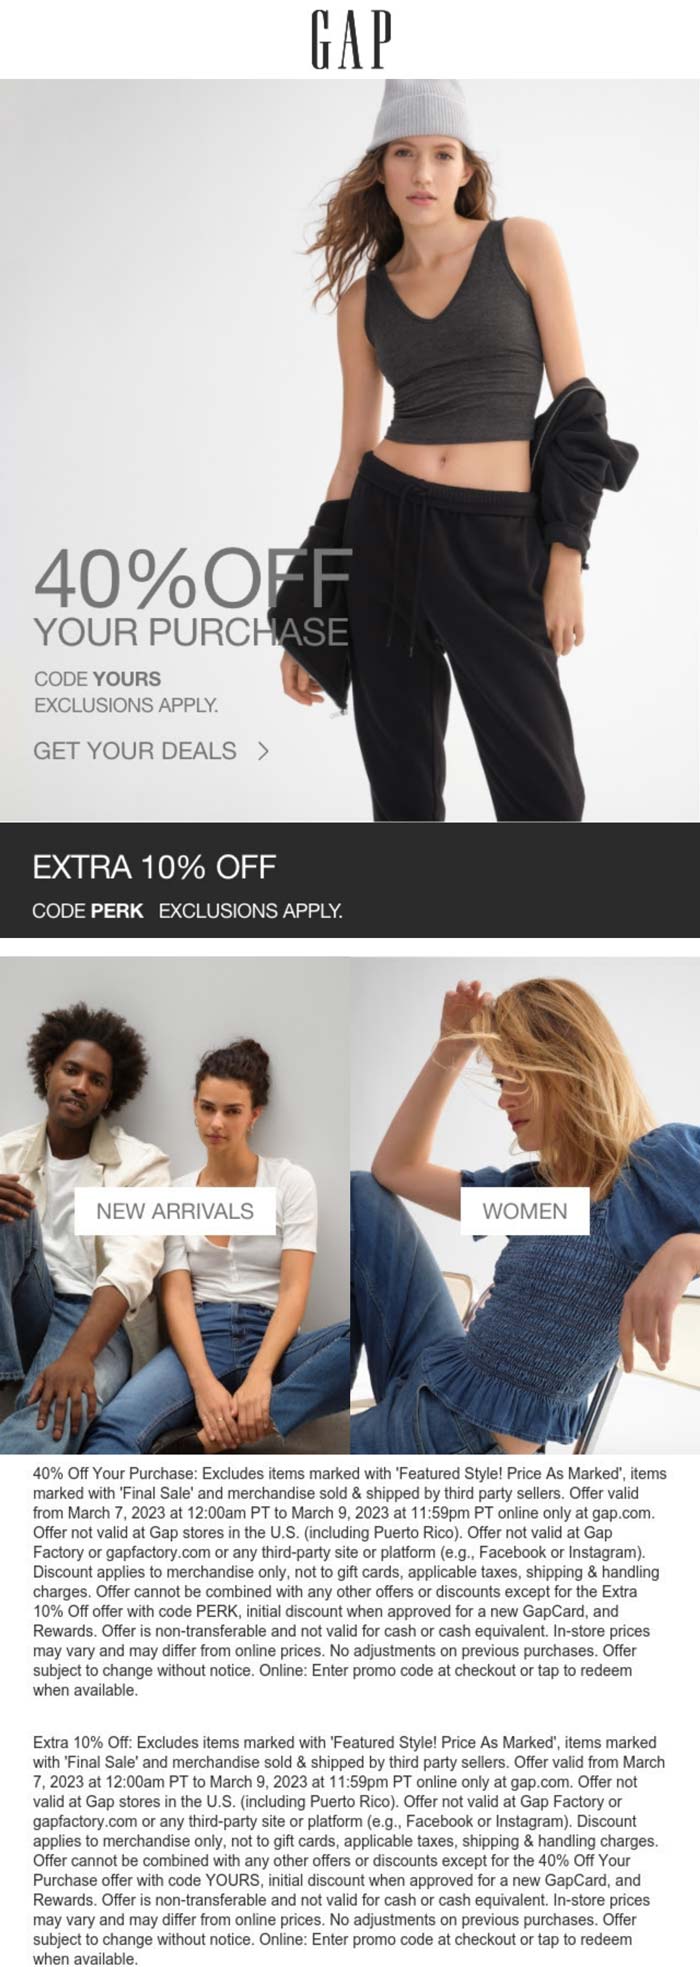 Gap stores Coupon  40-50% off online at Gap via promo code YOURS #gap 